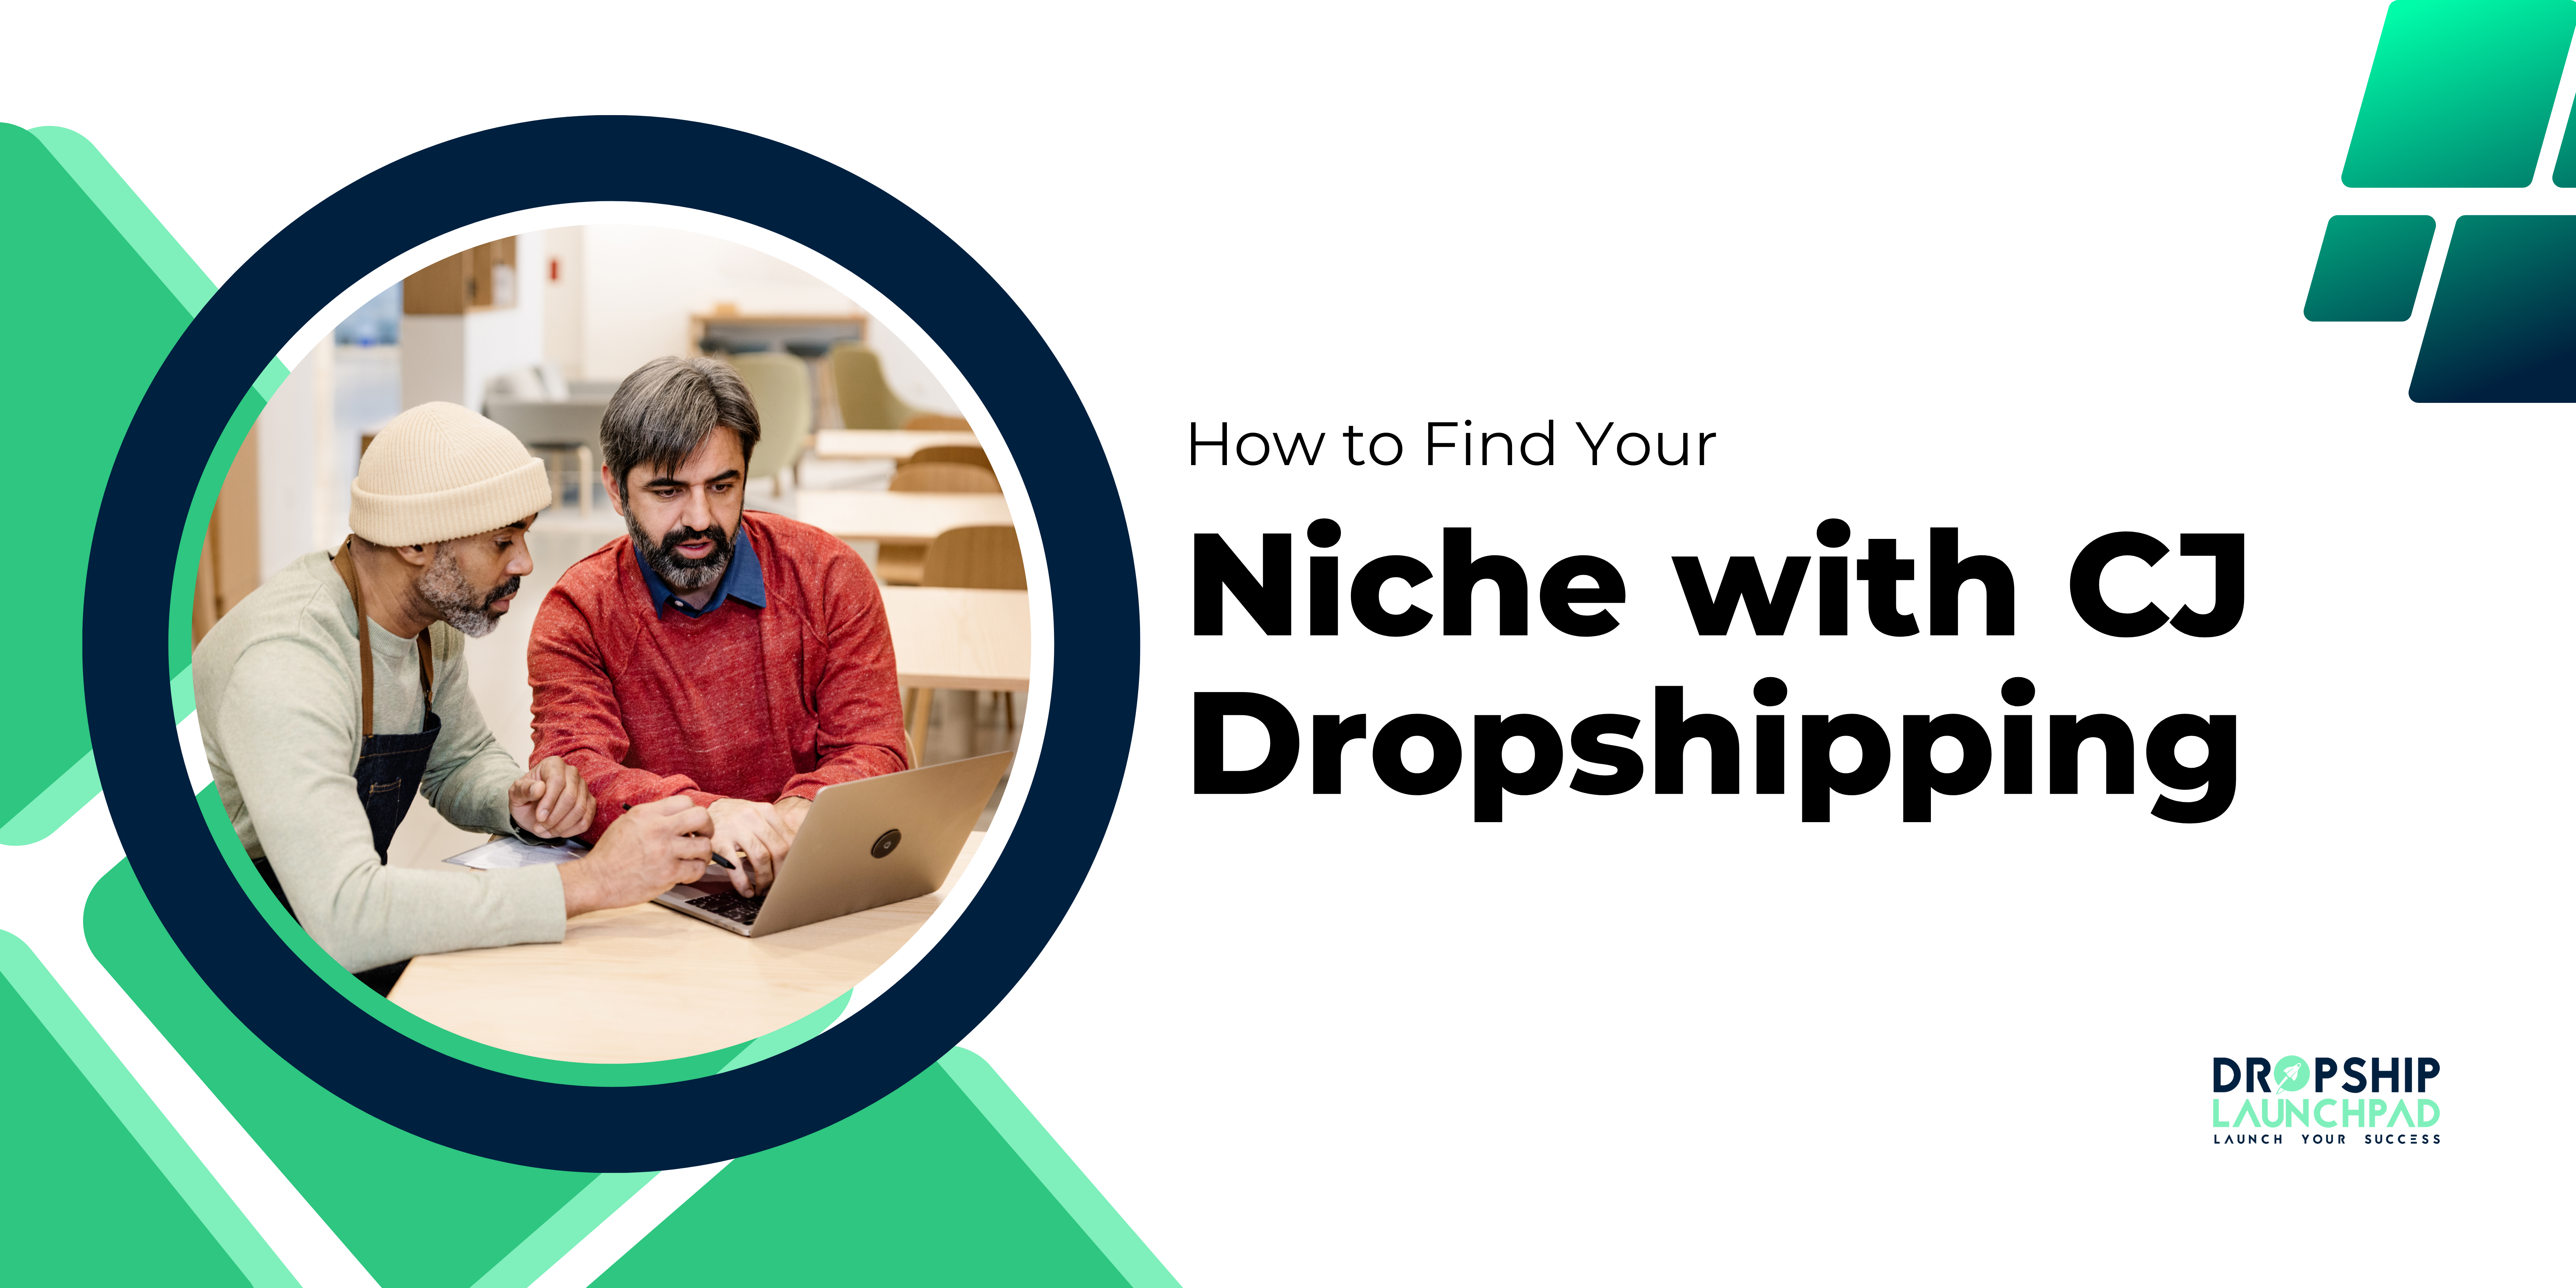 How to Find Your Niche with CJ Dropshipping